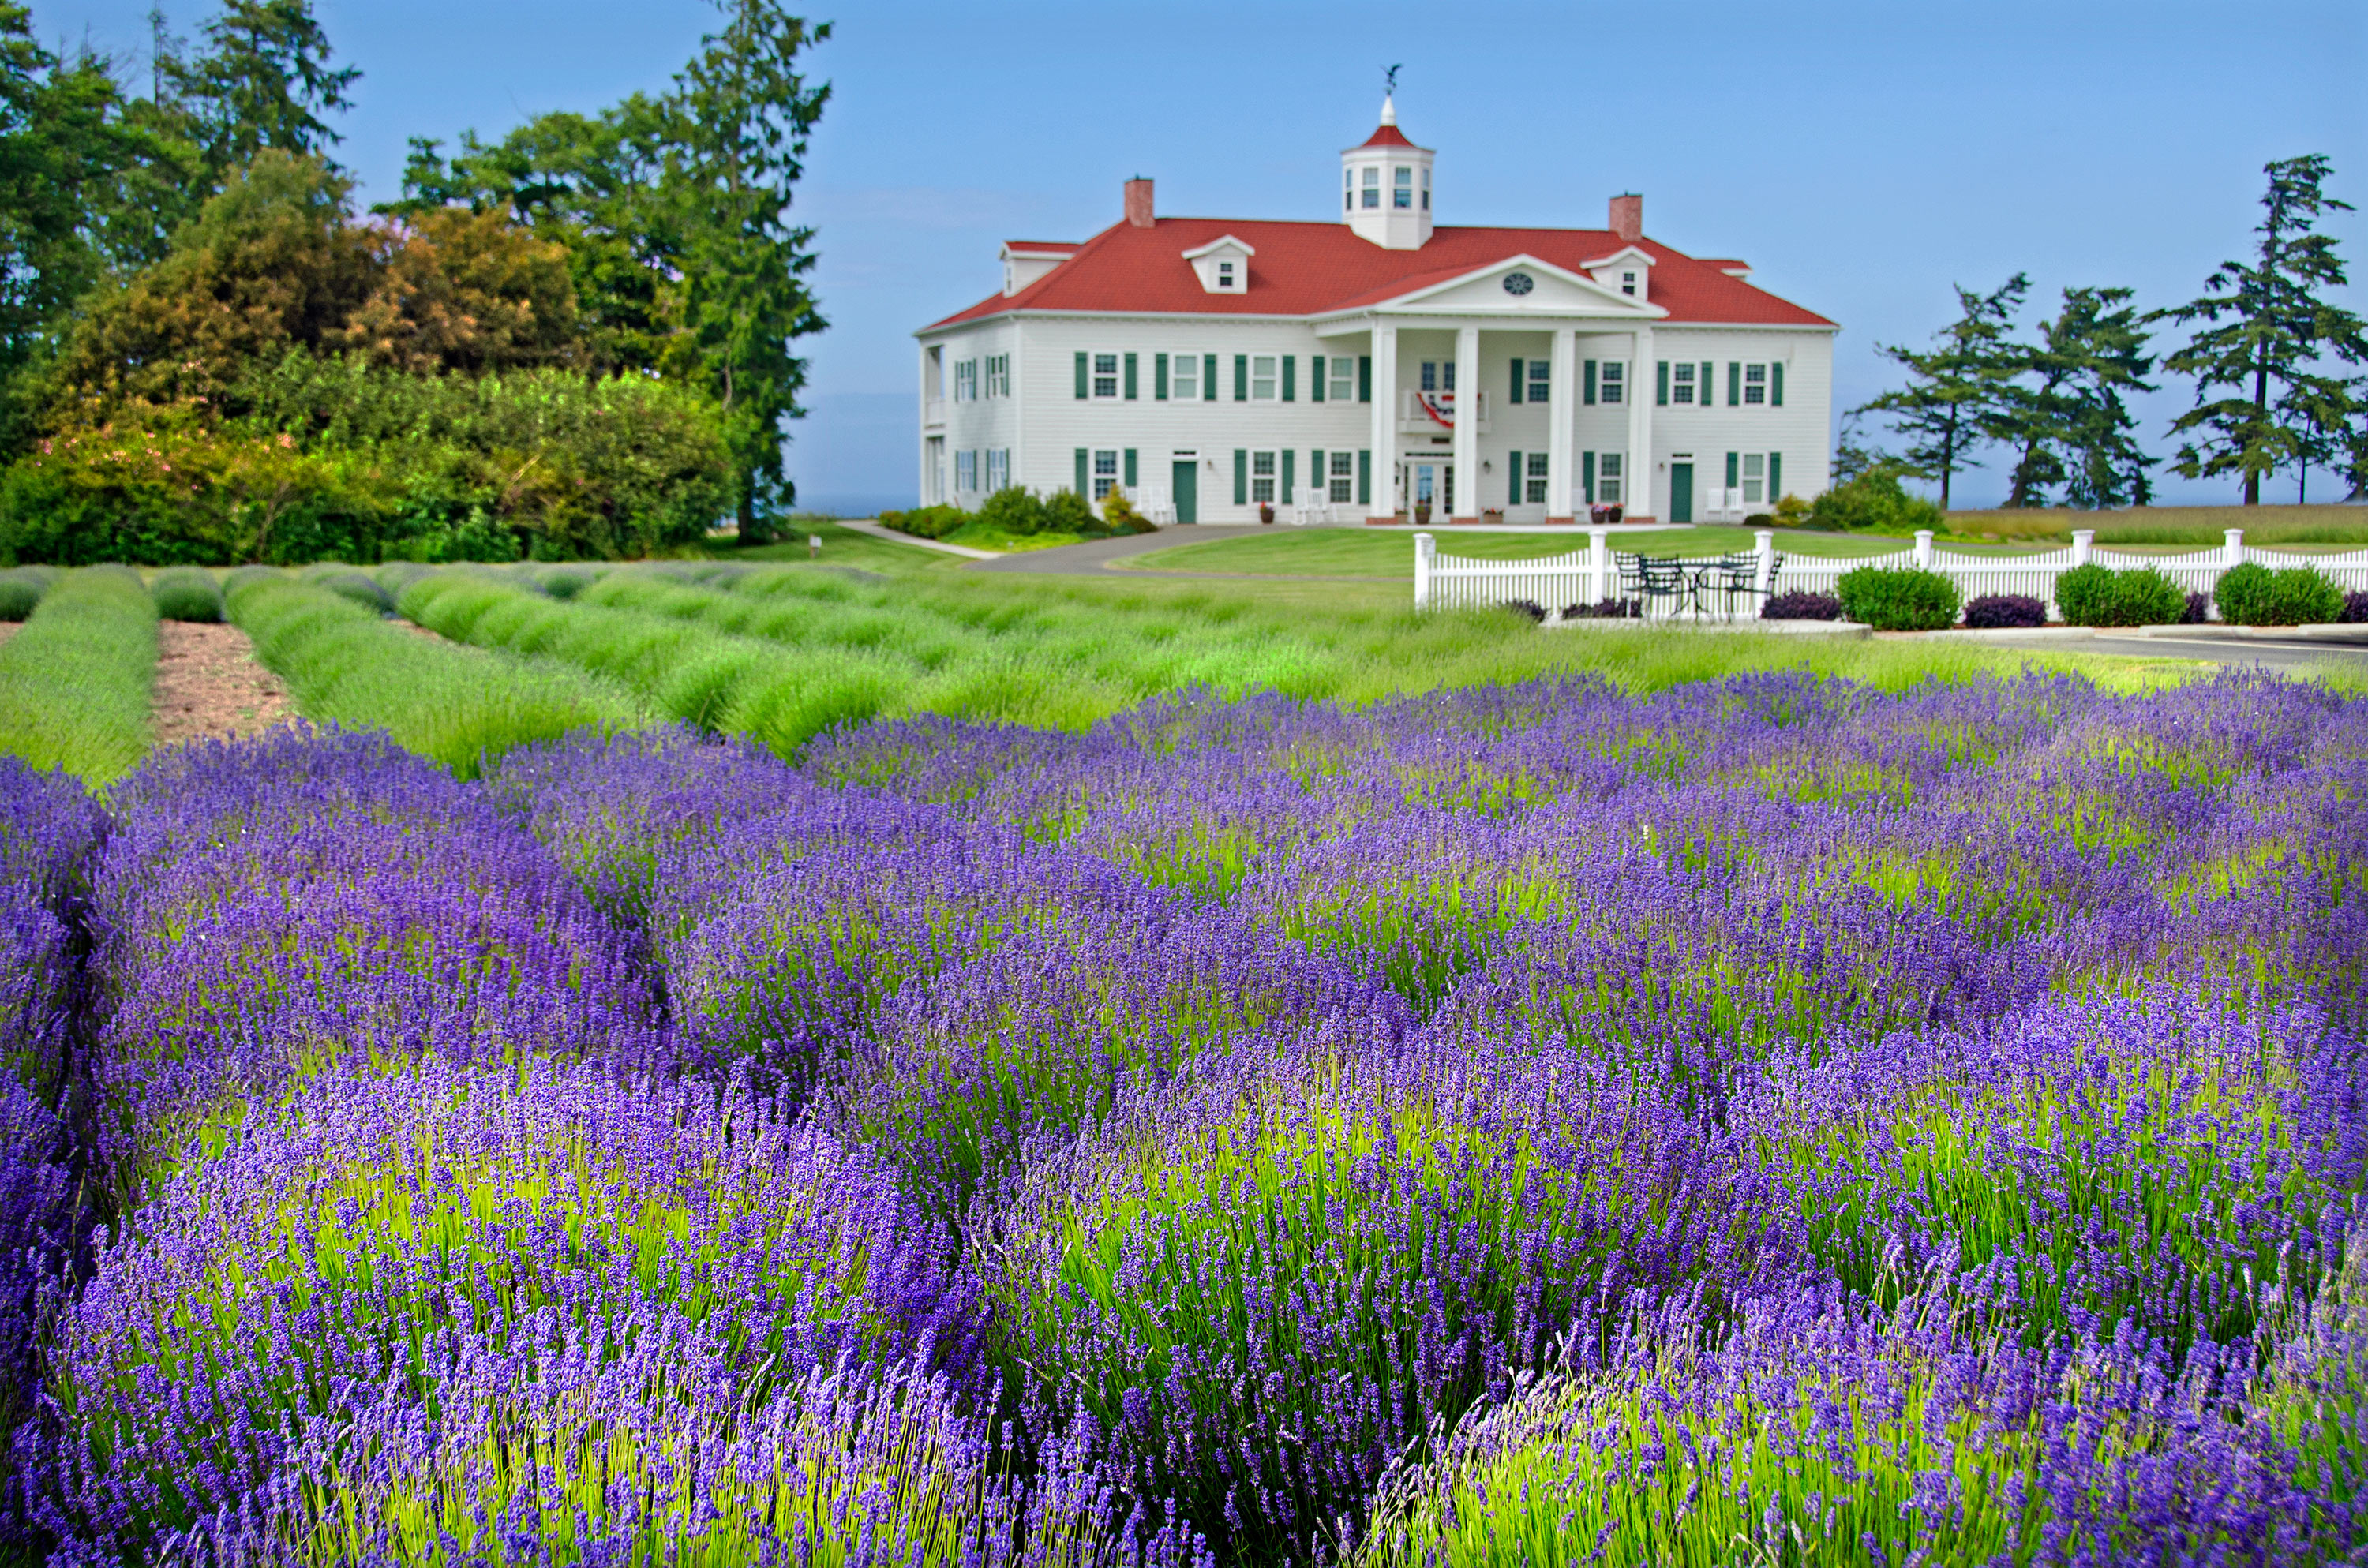 These Vibrant Lavender Fields Are in Full Bloom